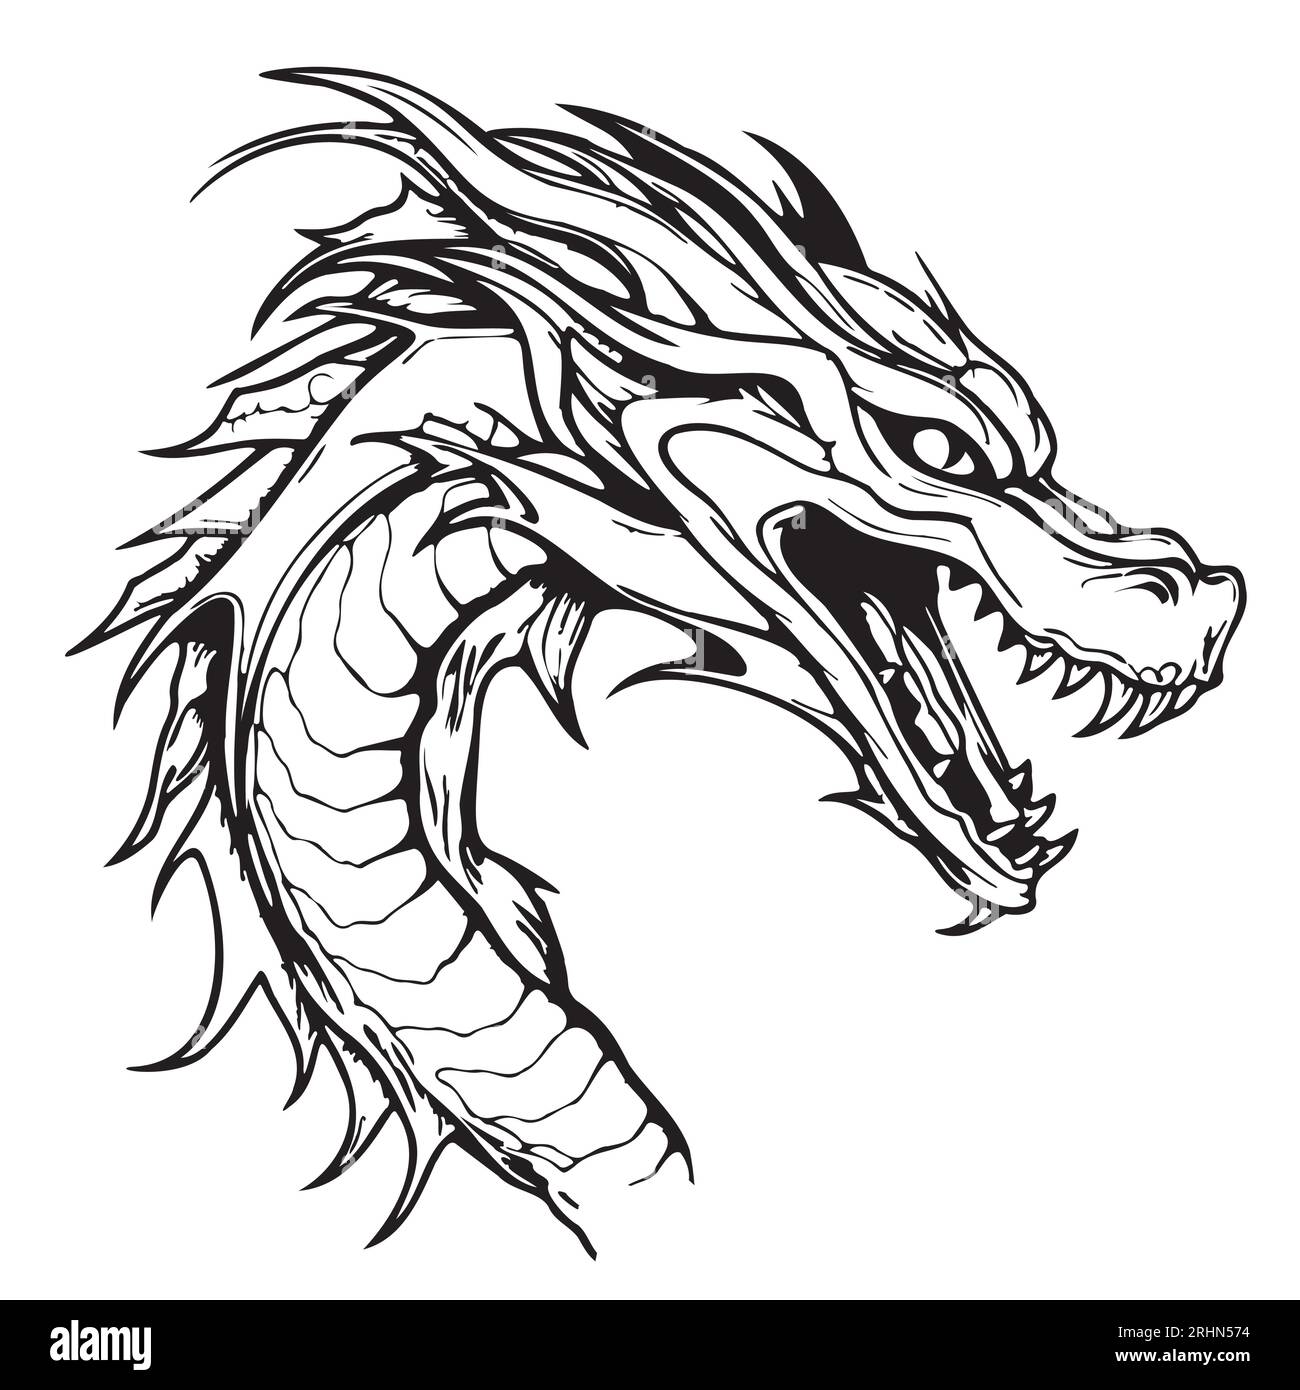 Dragon face mystical sketch drawn in doodle style logo Stock Vector